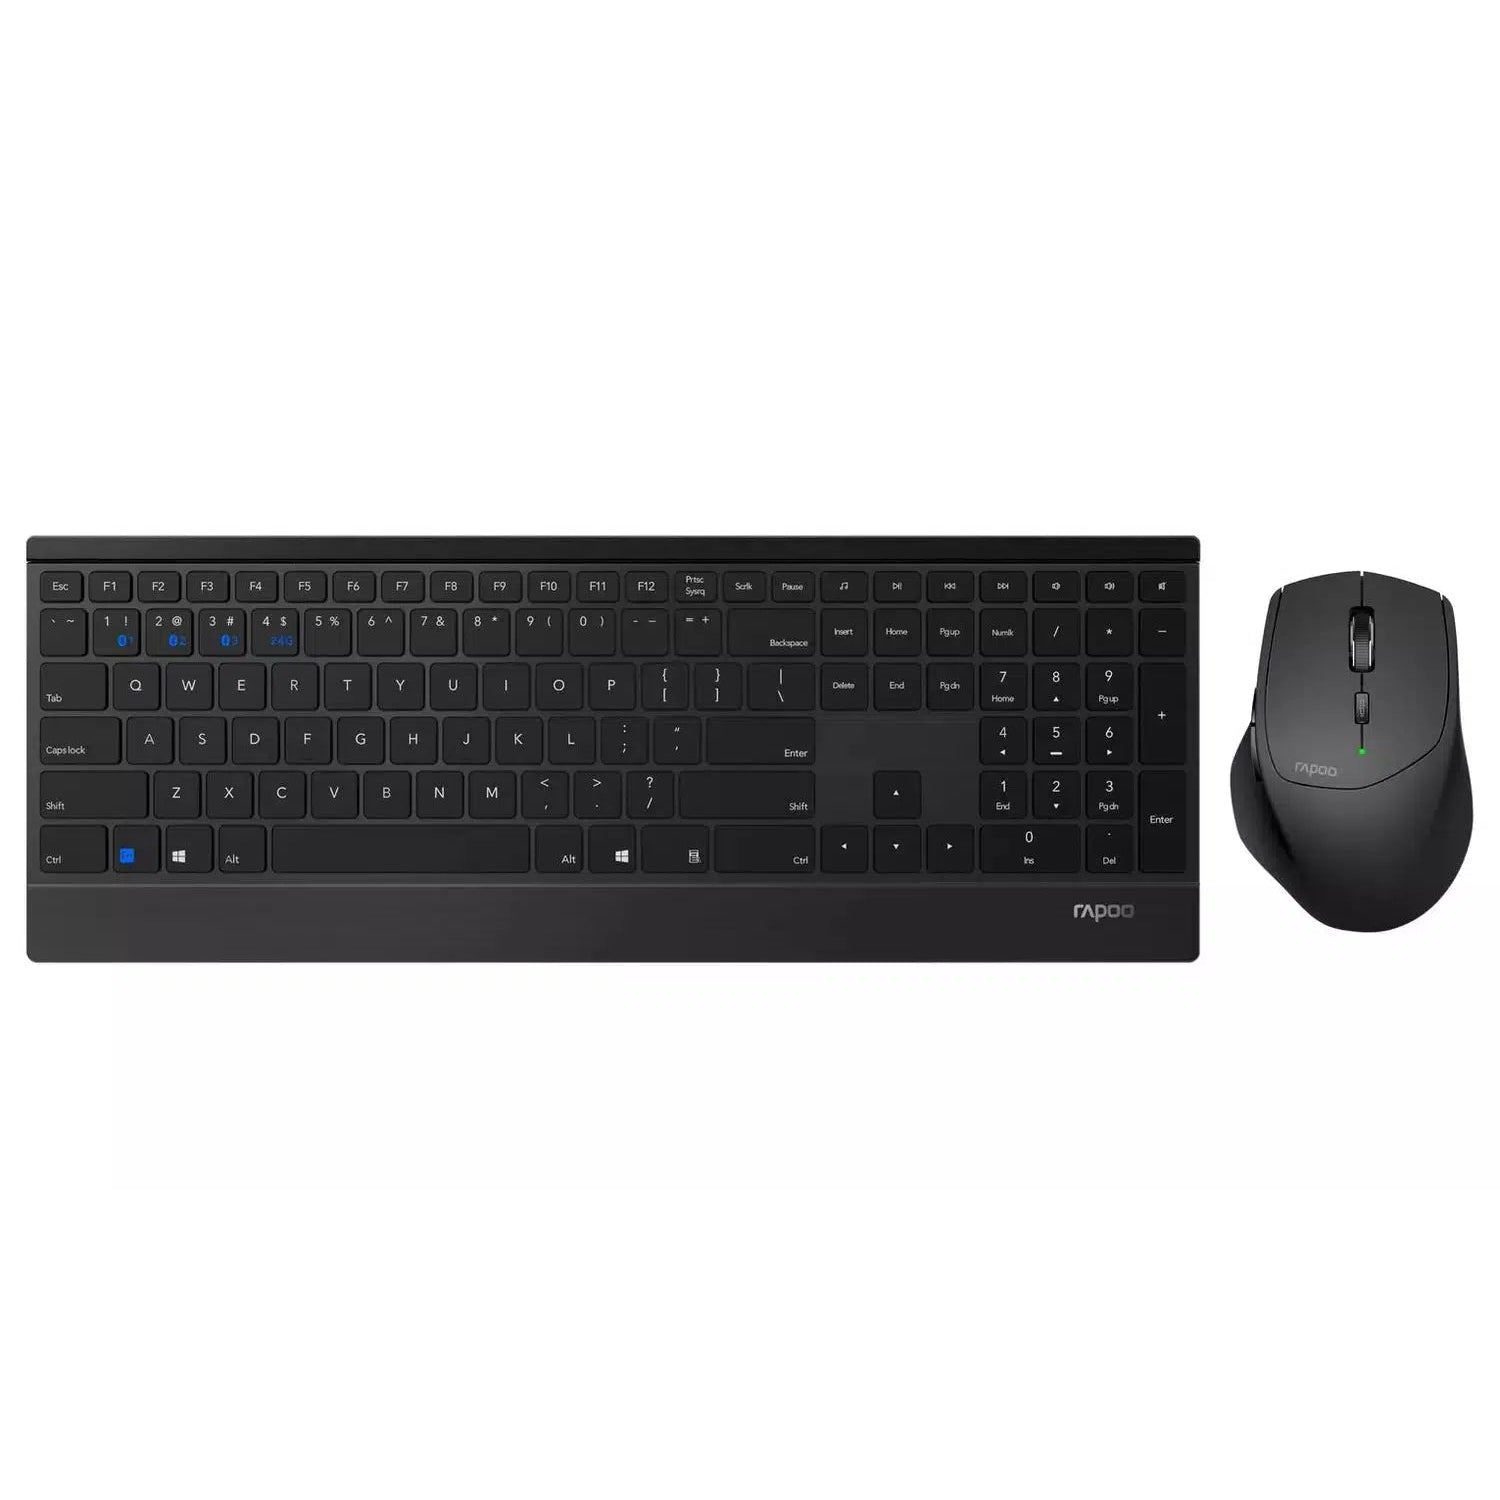 Rapoo 9500M Multi-Mode Wireless Mouse and Keyboard, Black - Refurbished Excellent